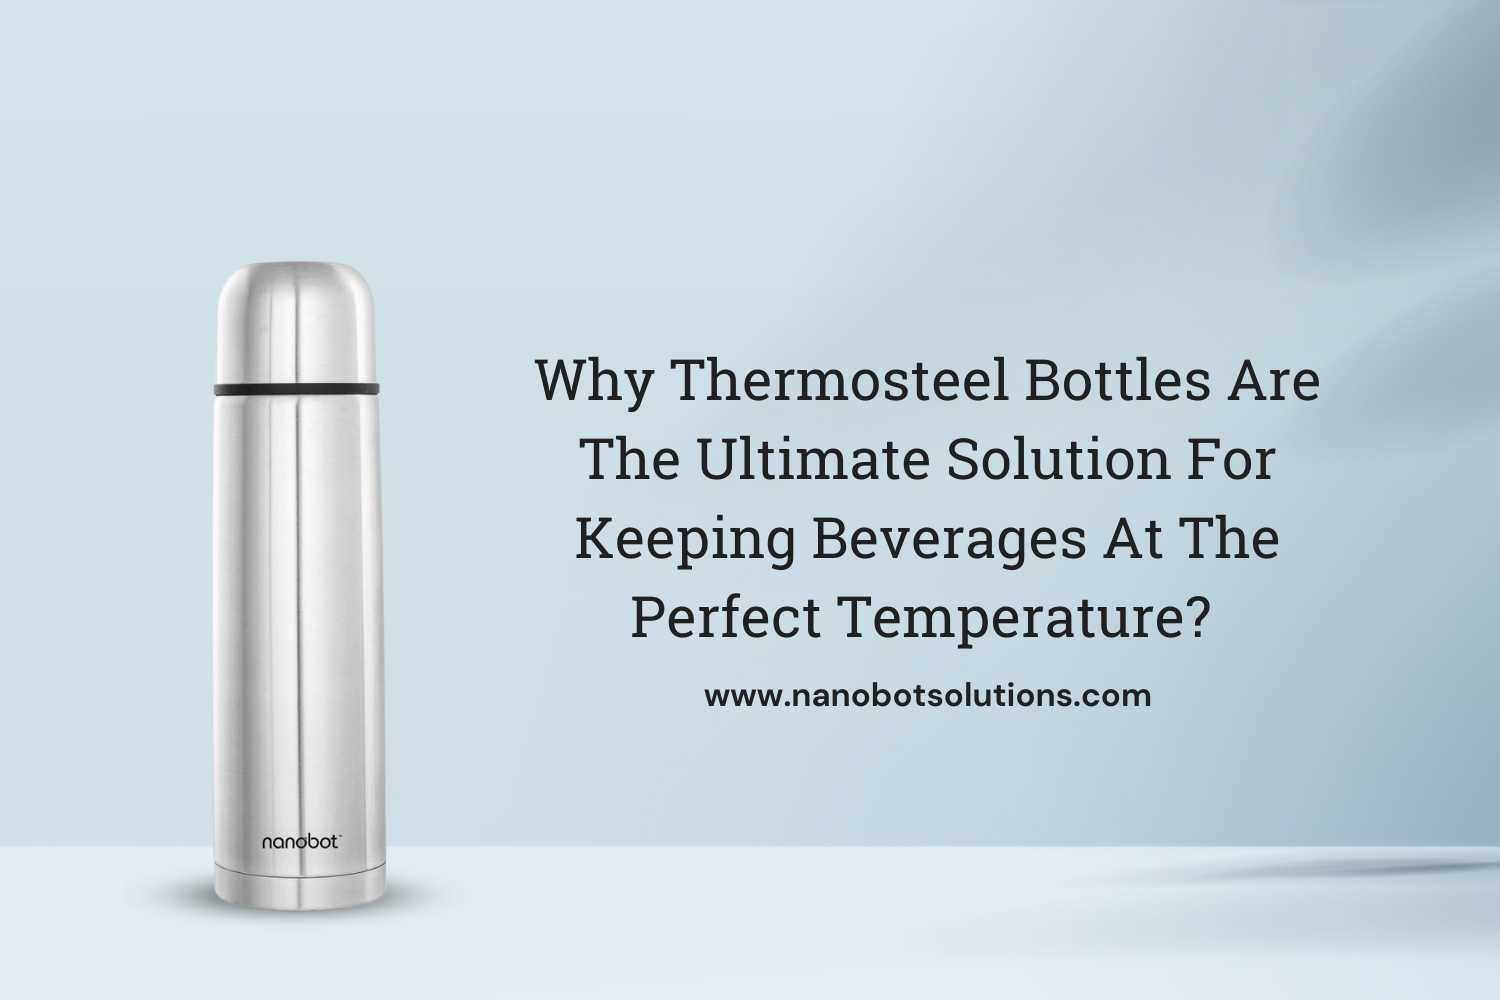 Why Thermosteel Bottles Are The Ultimate Solution For Keeping Beverages At The Perfect Temperature | Nanobot